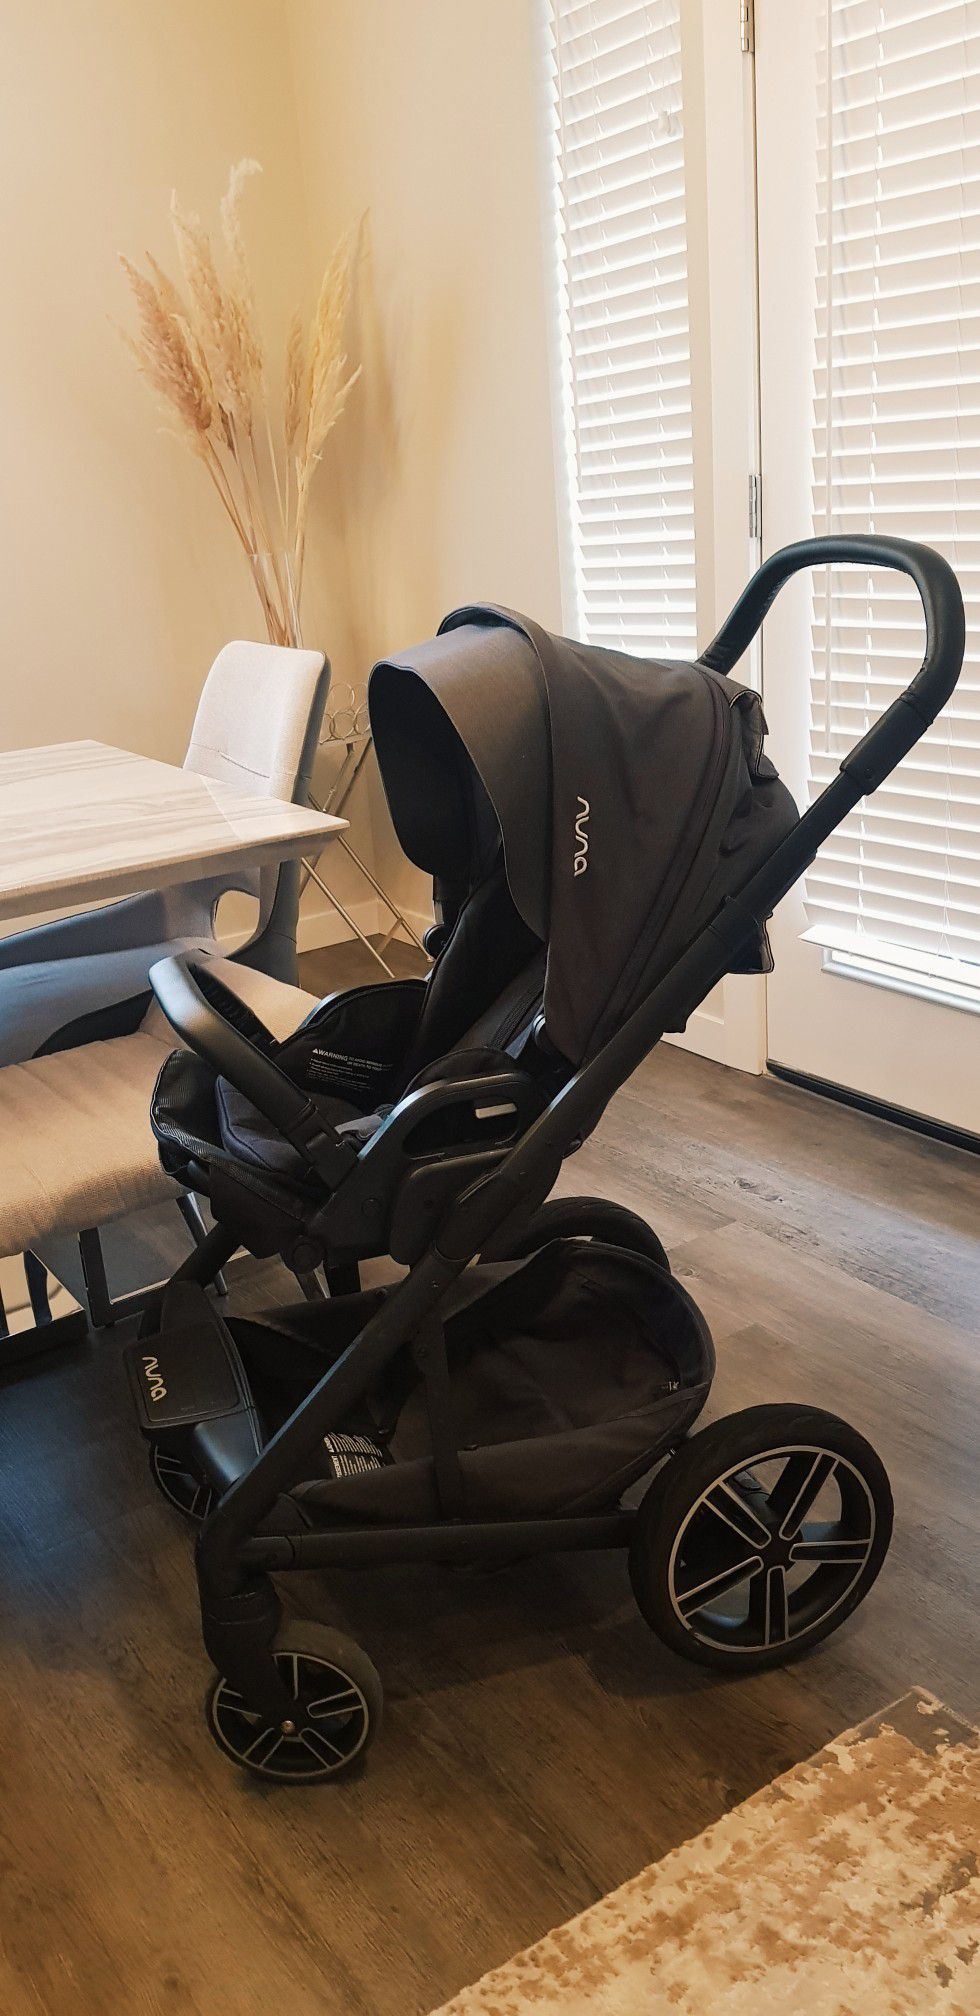 Nuna stroller with bassinet and extras